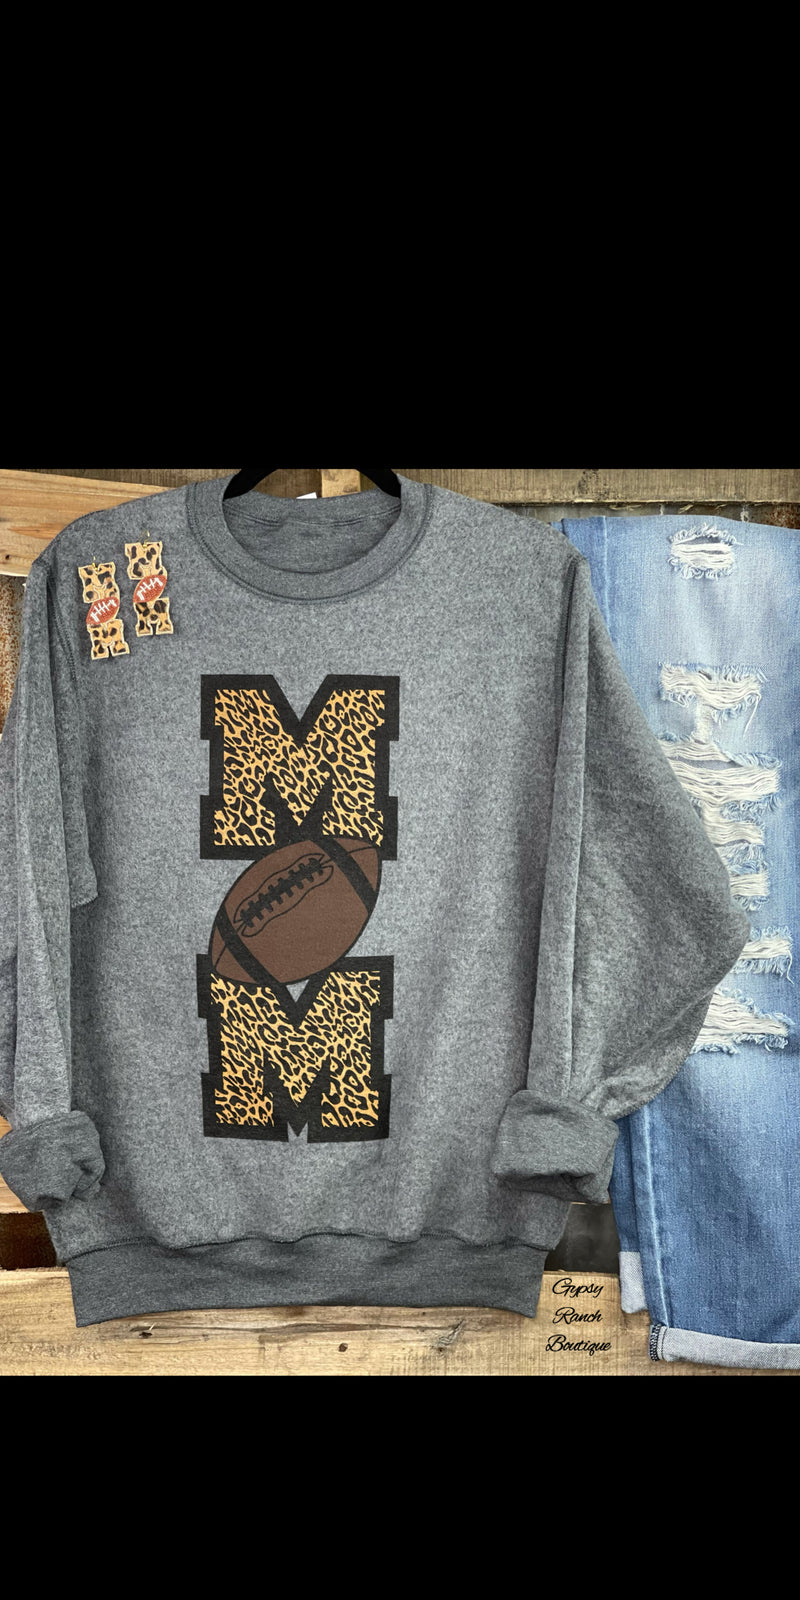 MAMA Leopard Football Inside Out Sweatshirt - Also in Plus Size